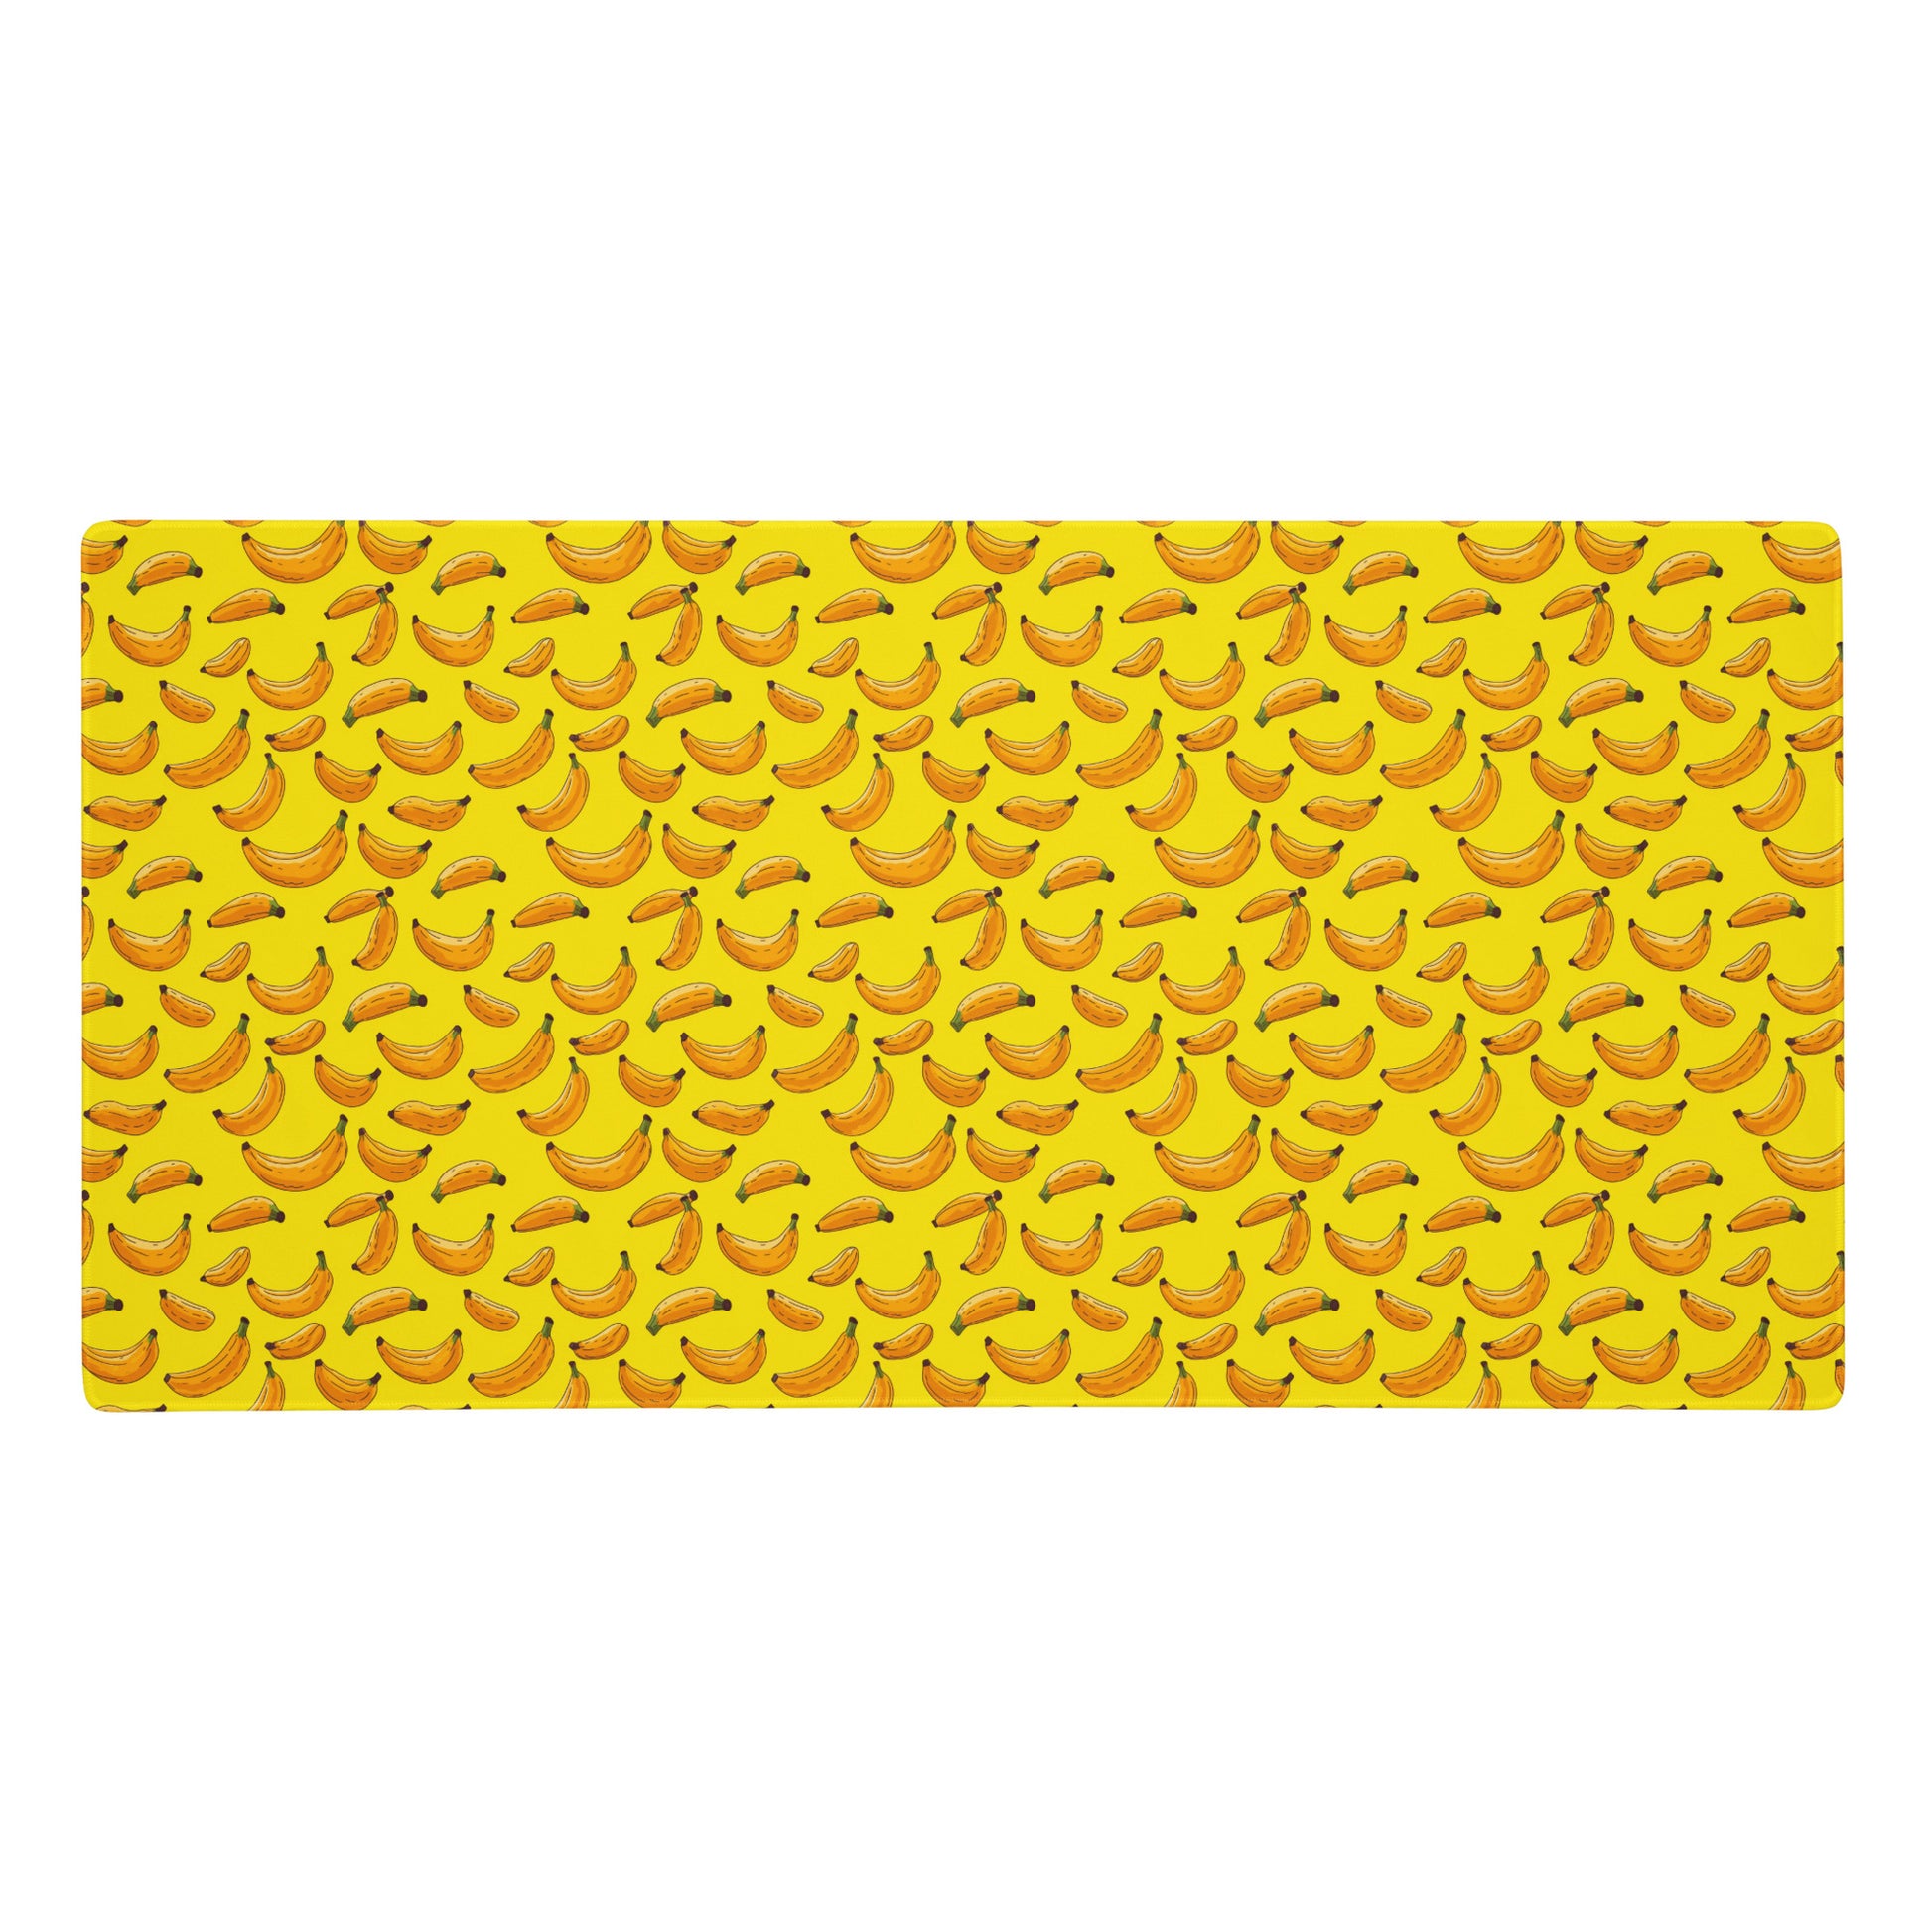 A 36" x 18" desk pad with bananas all over it. Yellow in color.